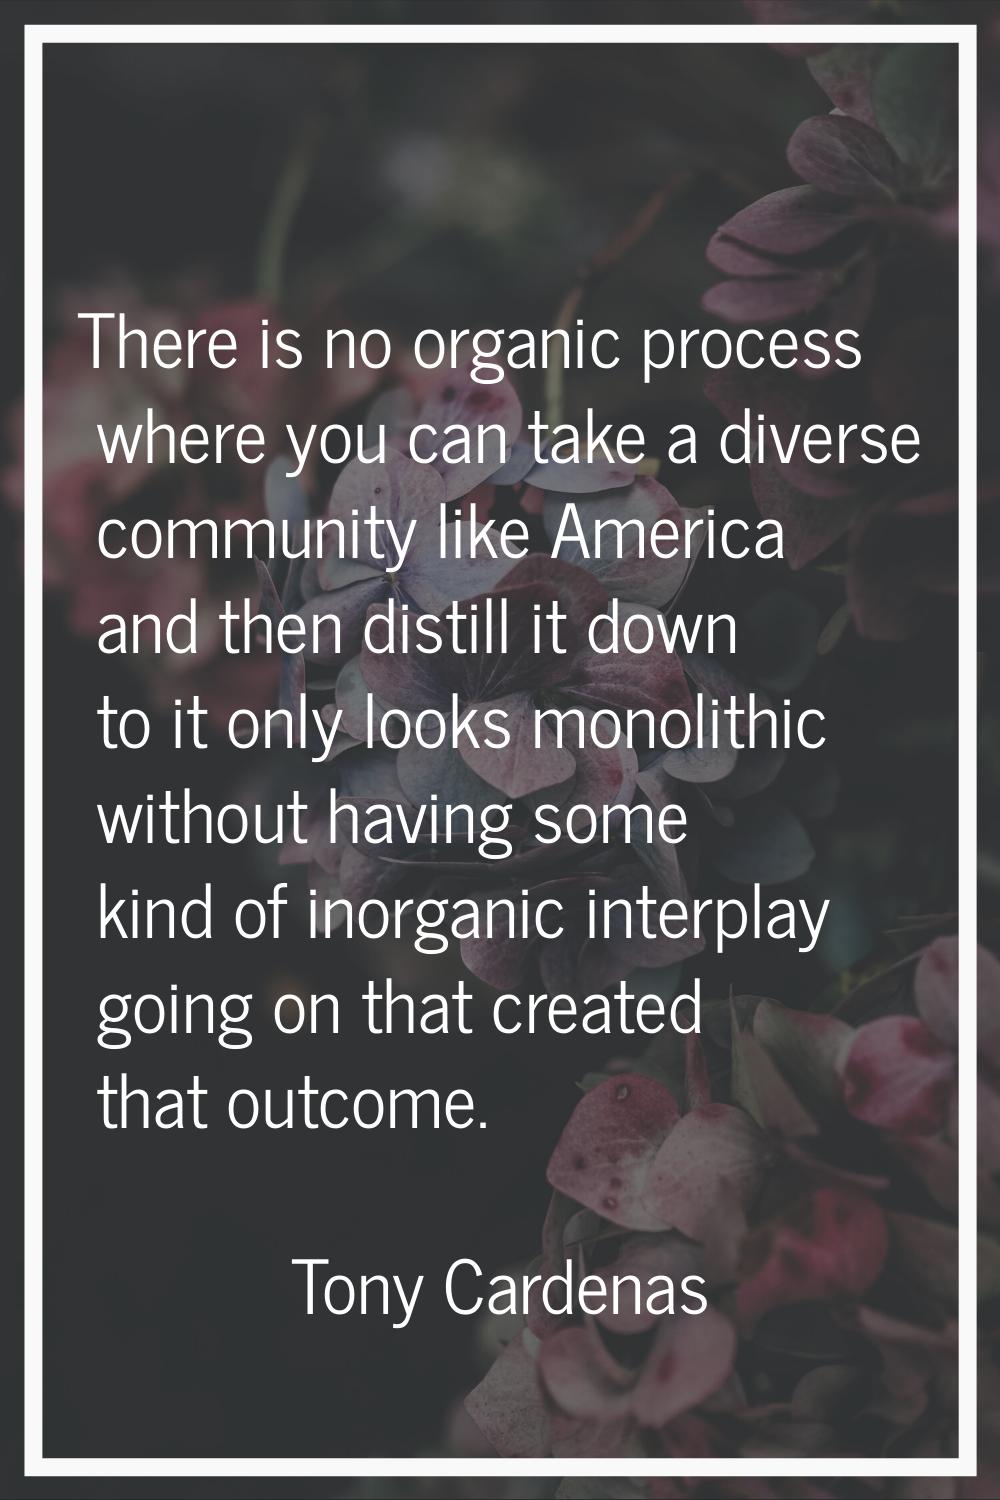 There is no organic process where you can take a diverse community like America and then distill it